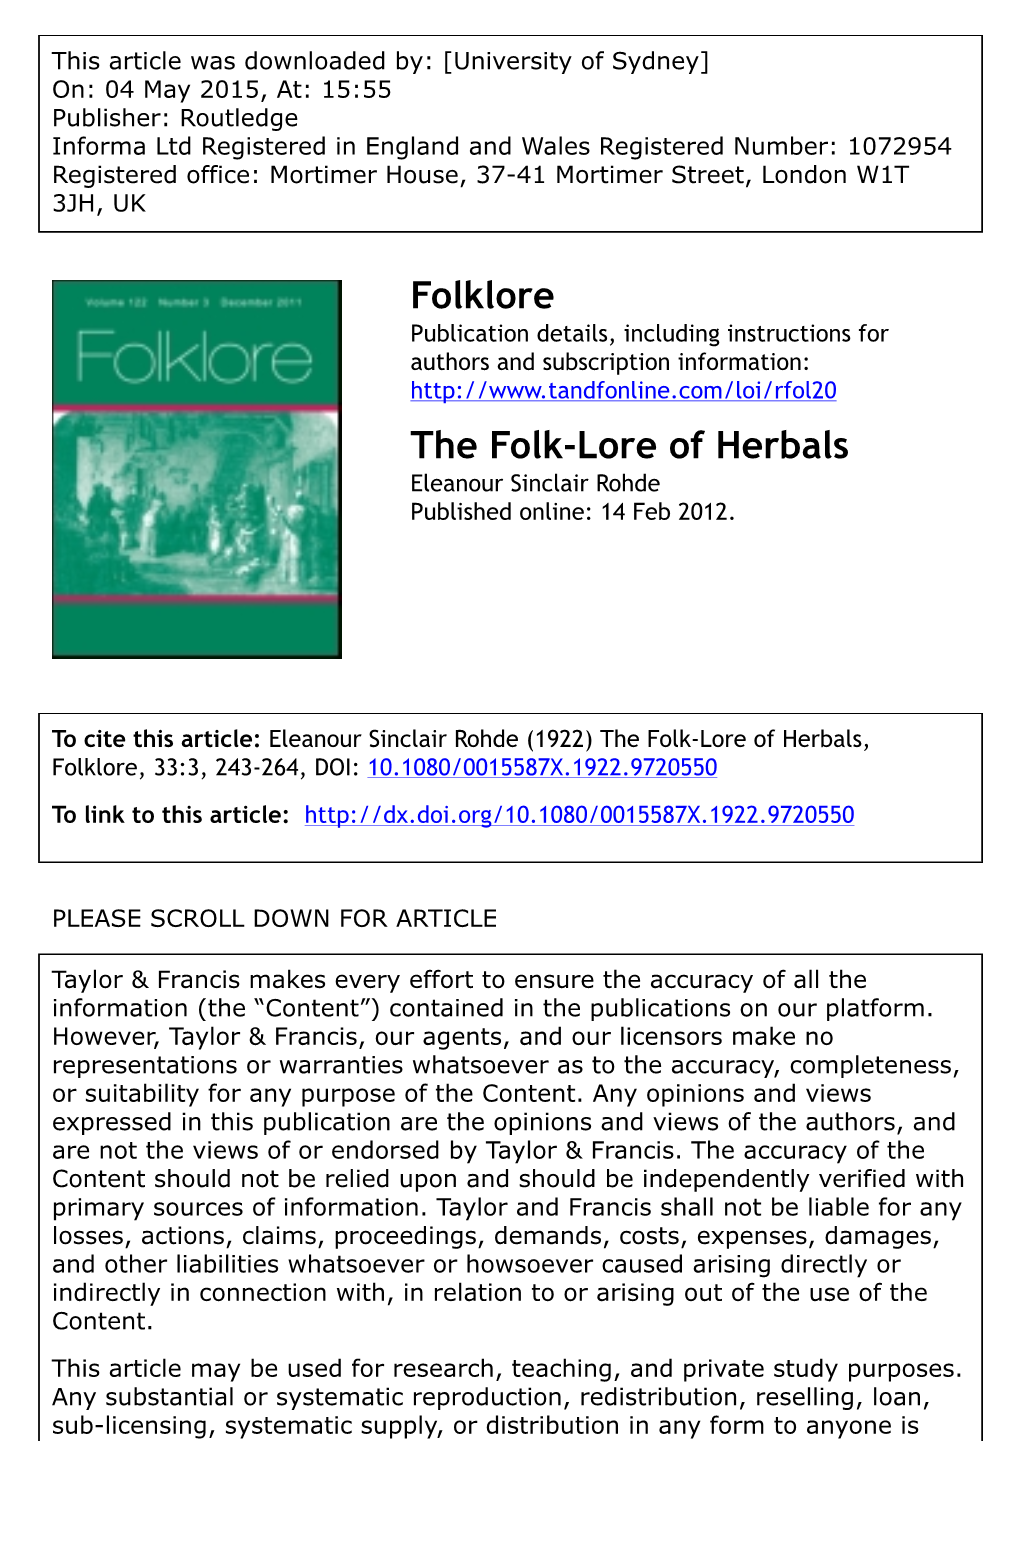 Folklore the Folk-Lore of Herbals